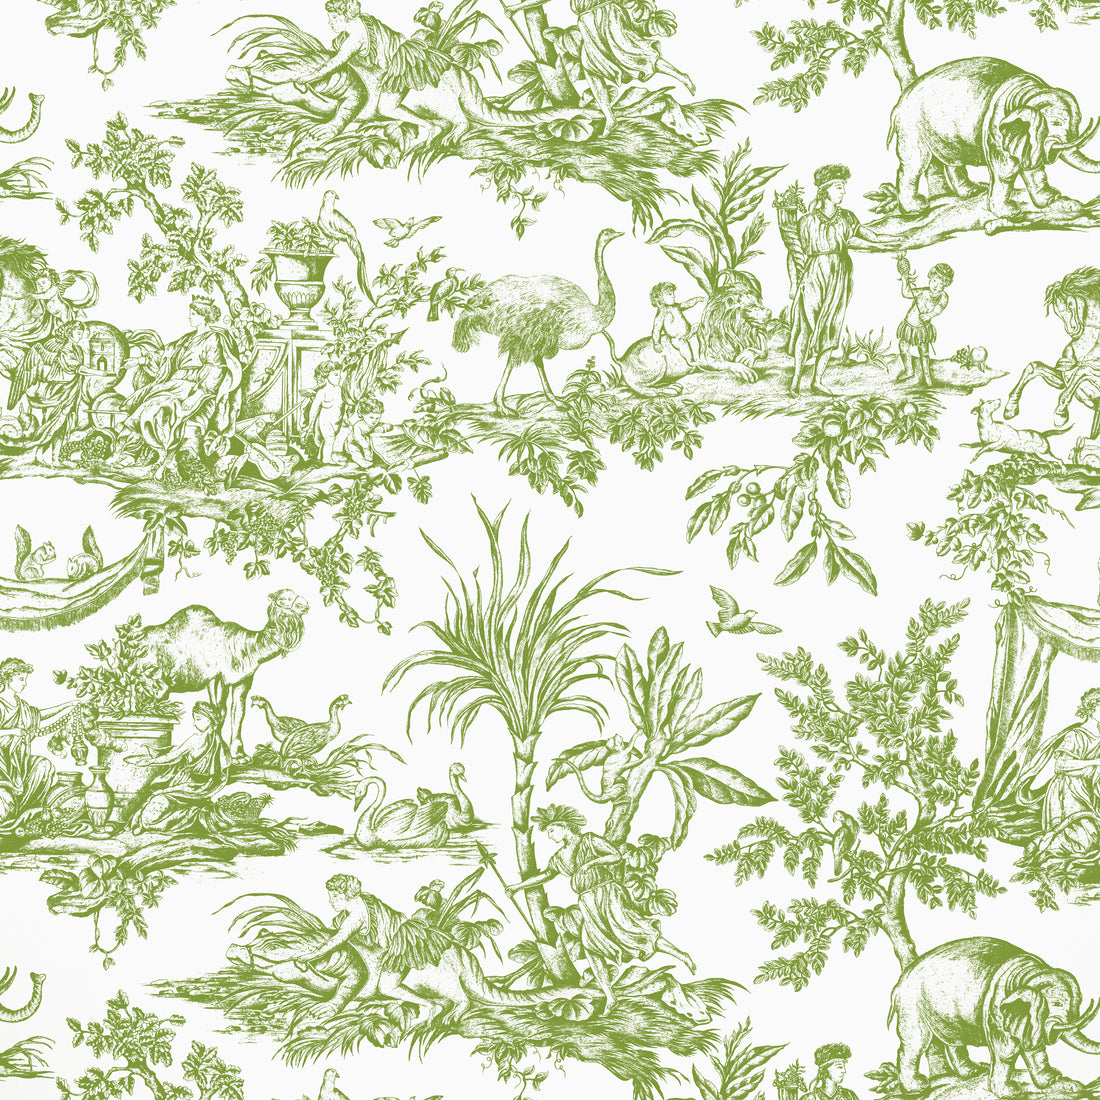 Antilles Toile fabric in green color - pattern number AF15172 - by Anna French in the Antilles collection